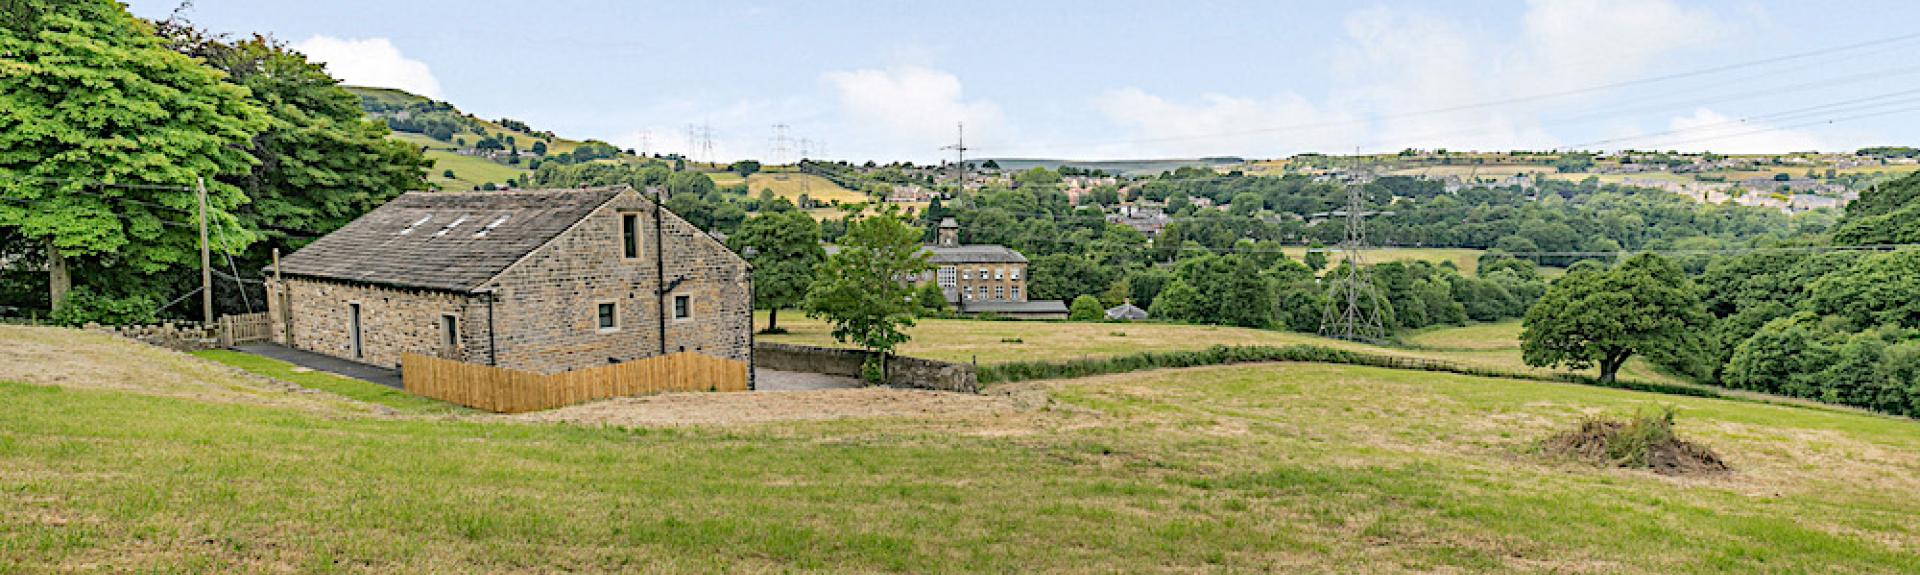 Remote barn conversion surrounded by open fields and mature trees in The Pennines.